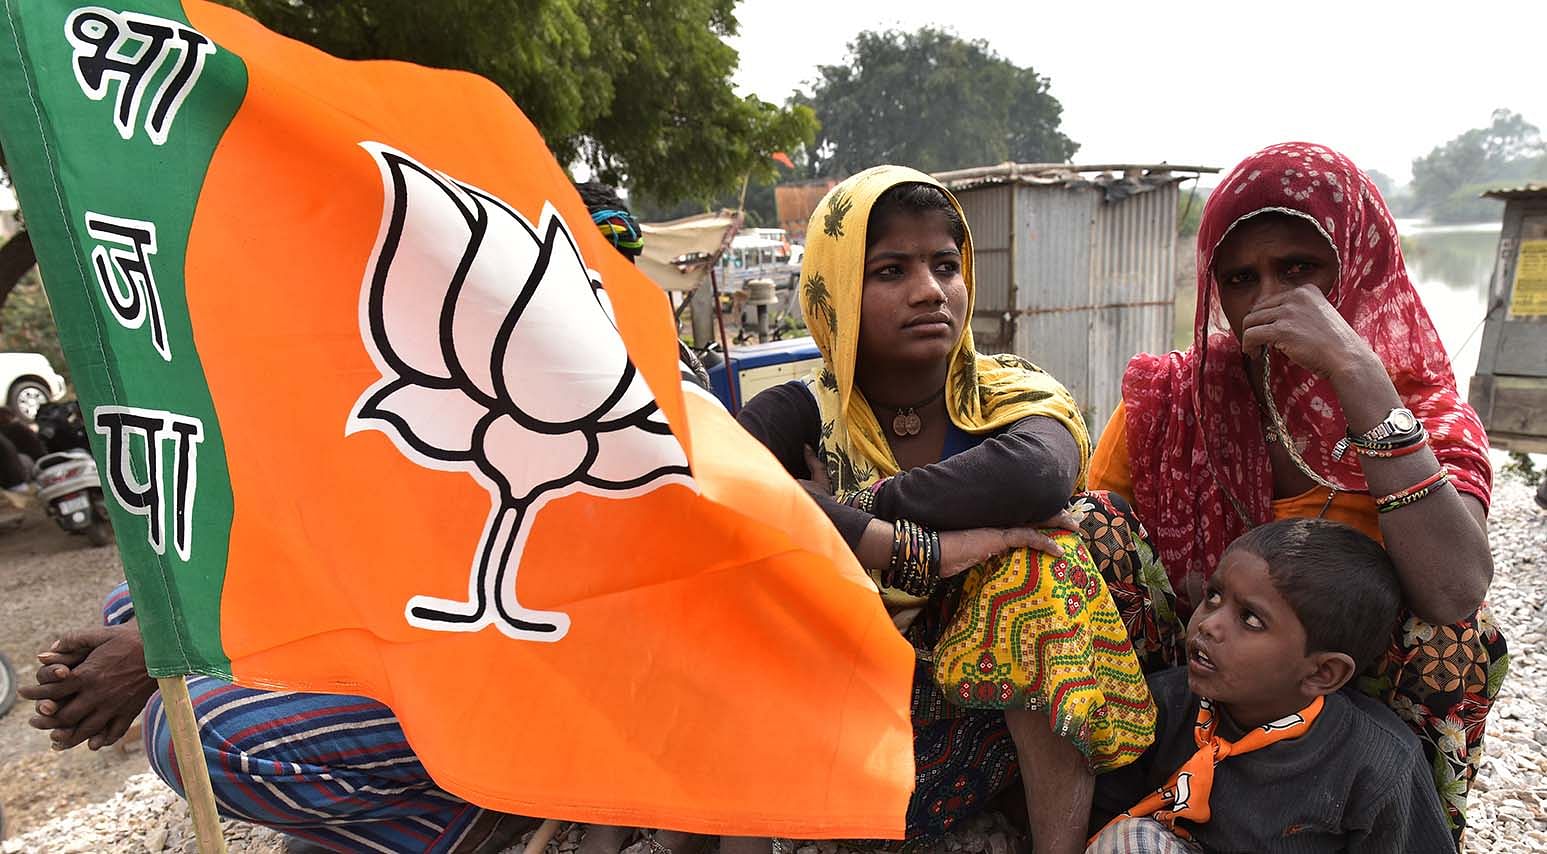 In the Assembly elections of 2017, the BJP won all the five segments that form the Lok Sabha constituency. Representative image